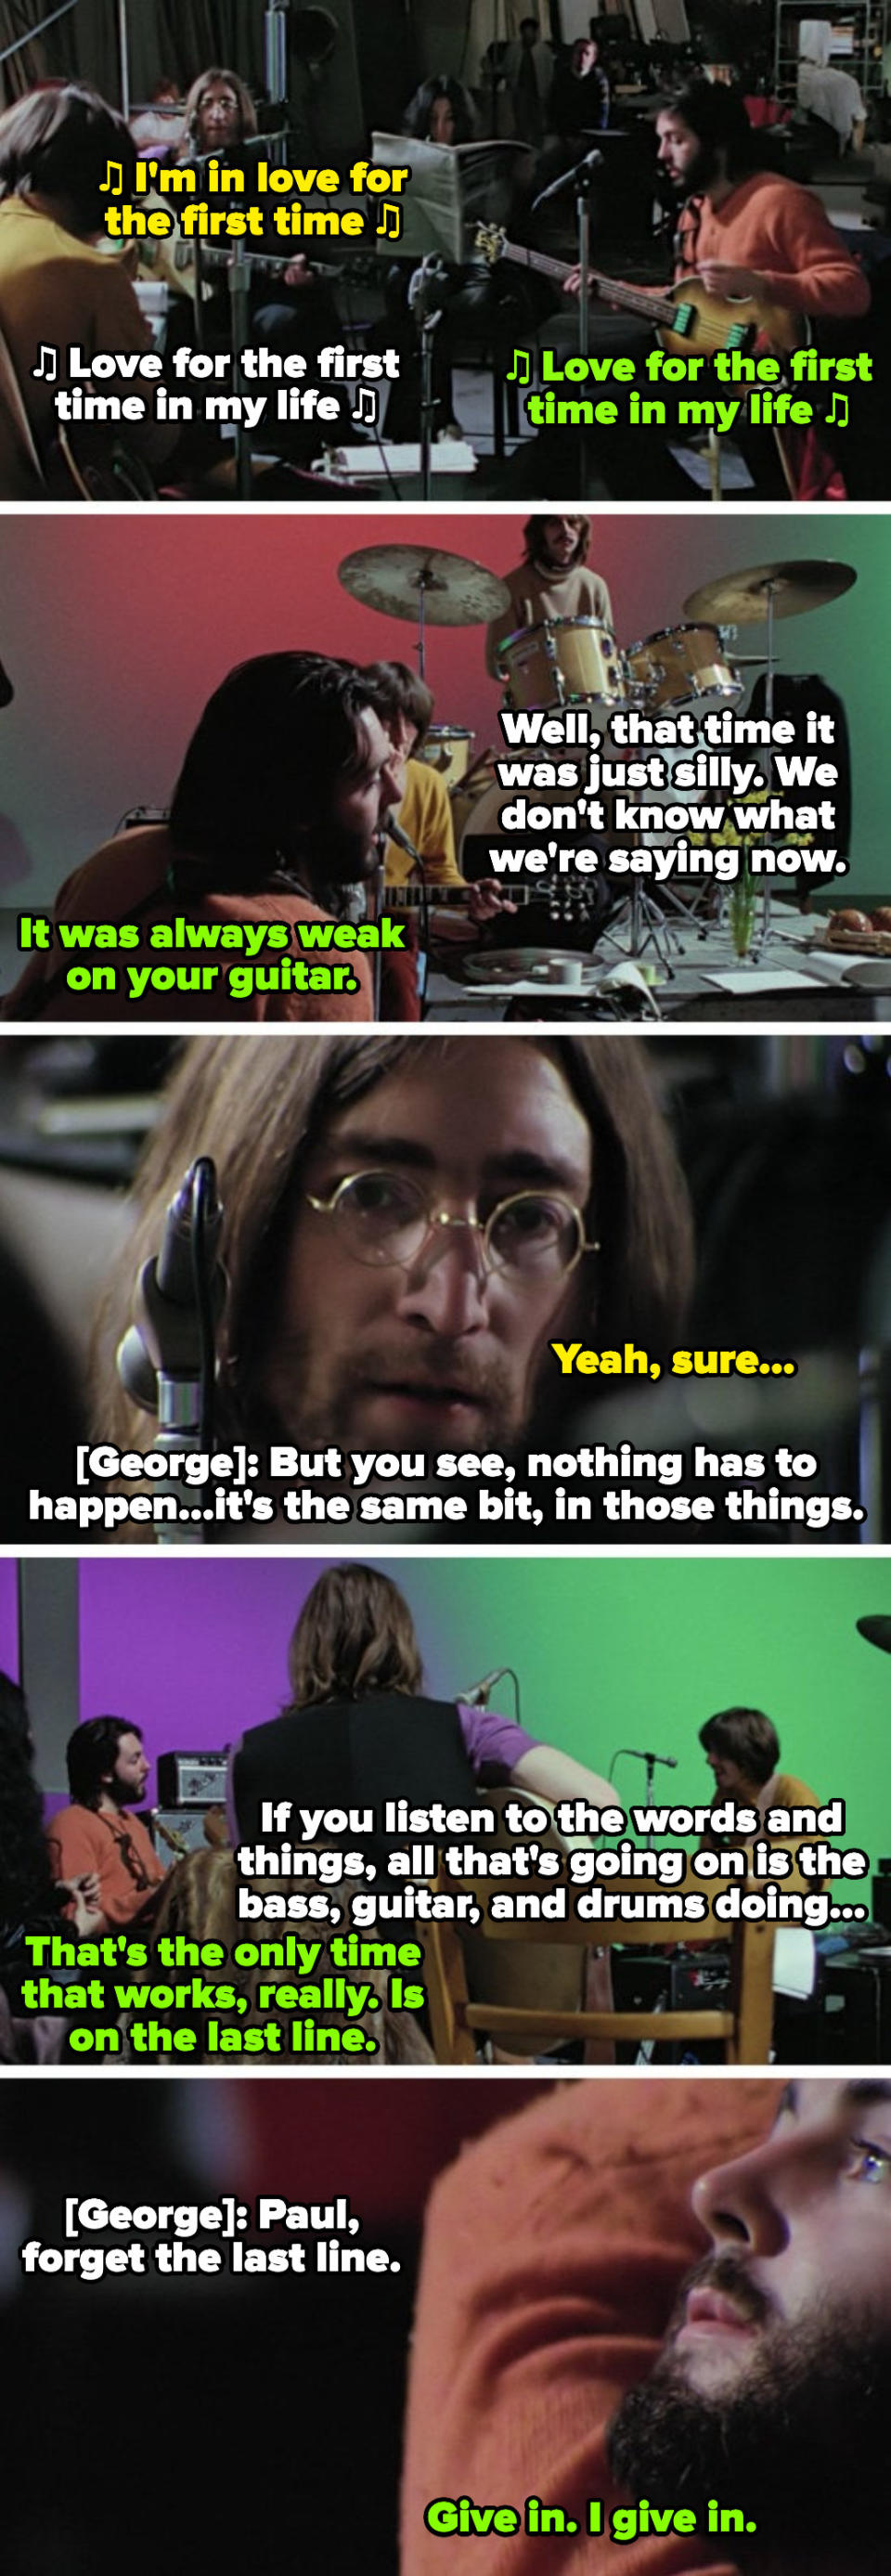 Paul to John: "It was always weak on your guitar" John to Paul: "Yeah, sure" George to Paul: "If you listen to the words, all that's going on is the bass, guitar, and drums doing" Paul to George: "Give in; I give in"